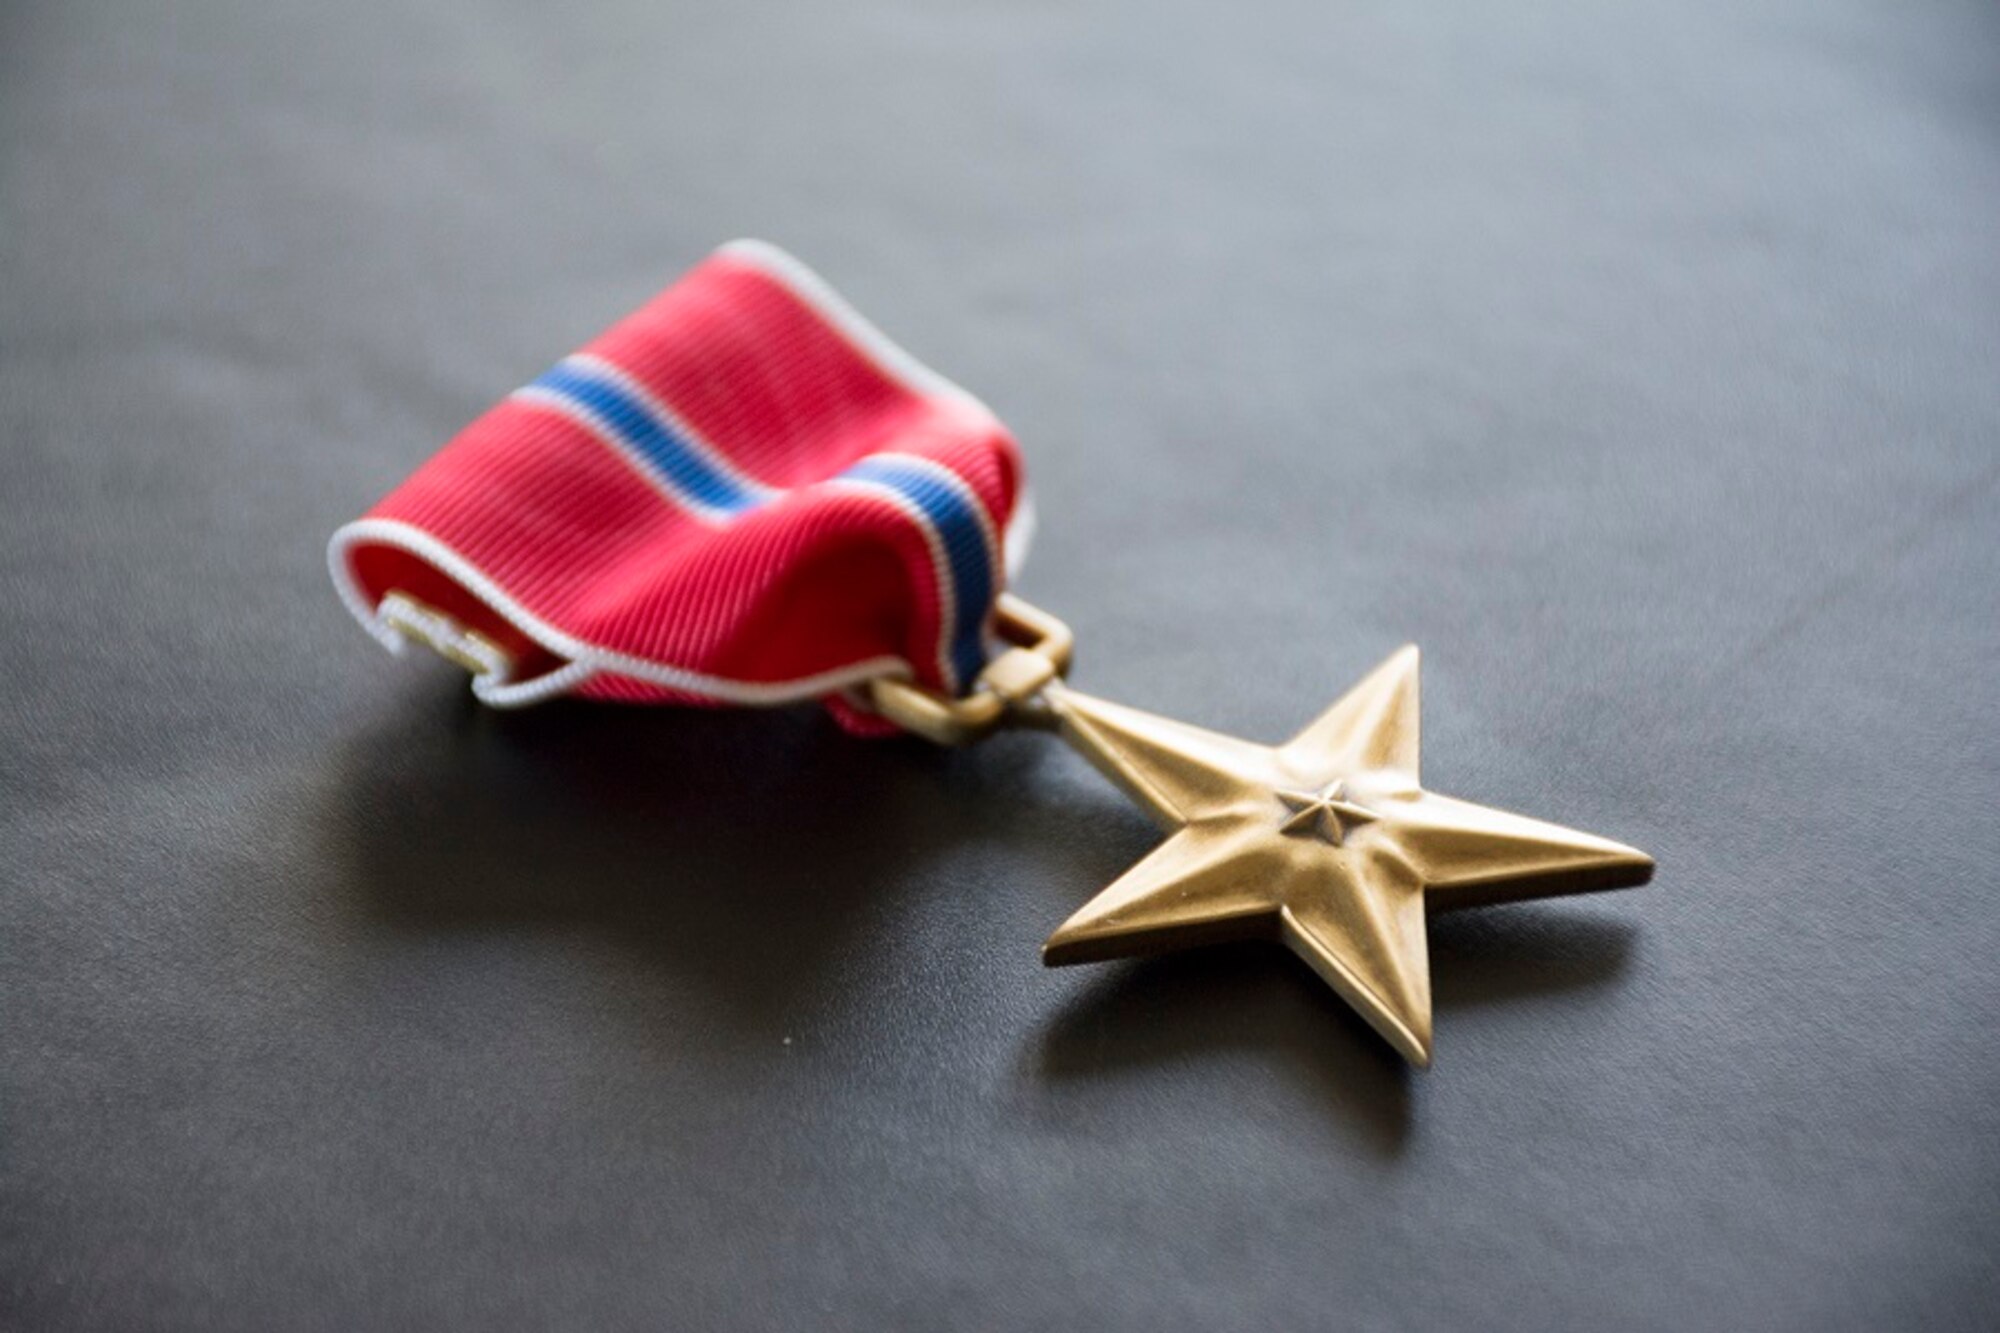 The Bronze Star, depicted here, is authorized by Executive Order No. 9419 on Feb. 4, 1944, and is awarded to a person in any branch of the military service who, while serving in any capacity with the armed forces of the United States on or after Dec. 7, 1941, who shall have distinguished him or her self by heroic or meritorious achievement or service, not involving participation in aerial flight, in connection with military operations against an armed enemy. (U.S. Air Force Photo/Maj. Jon Quinlan)